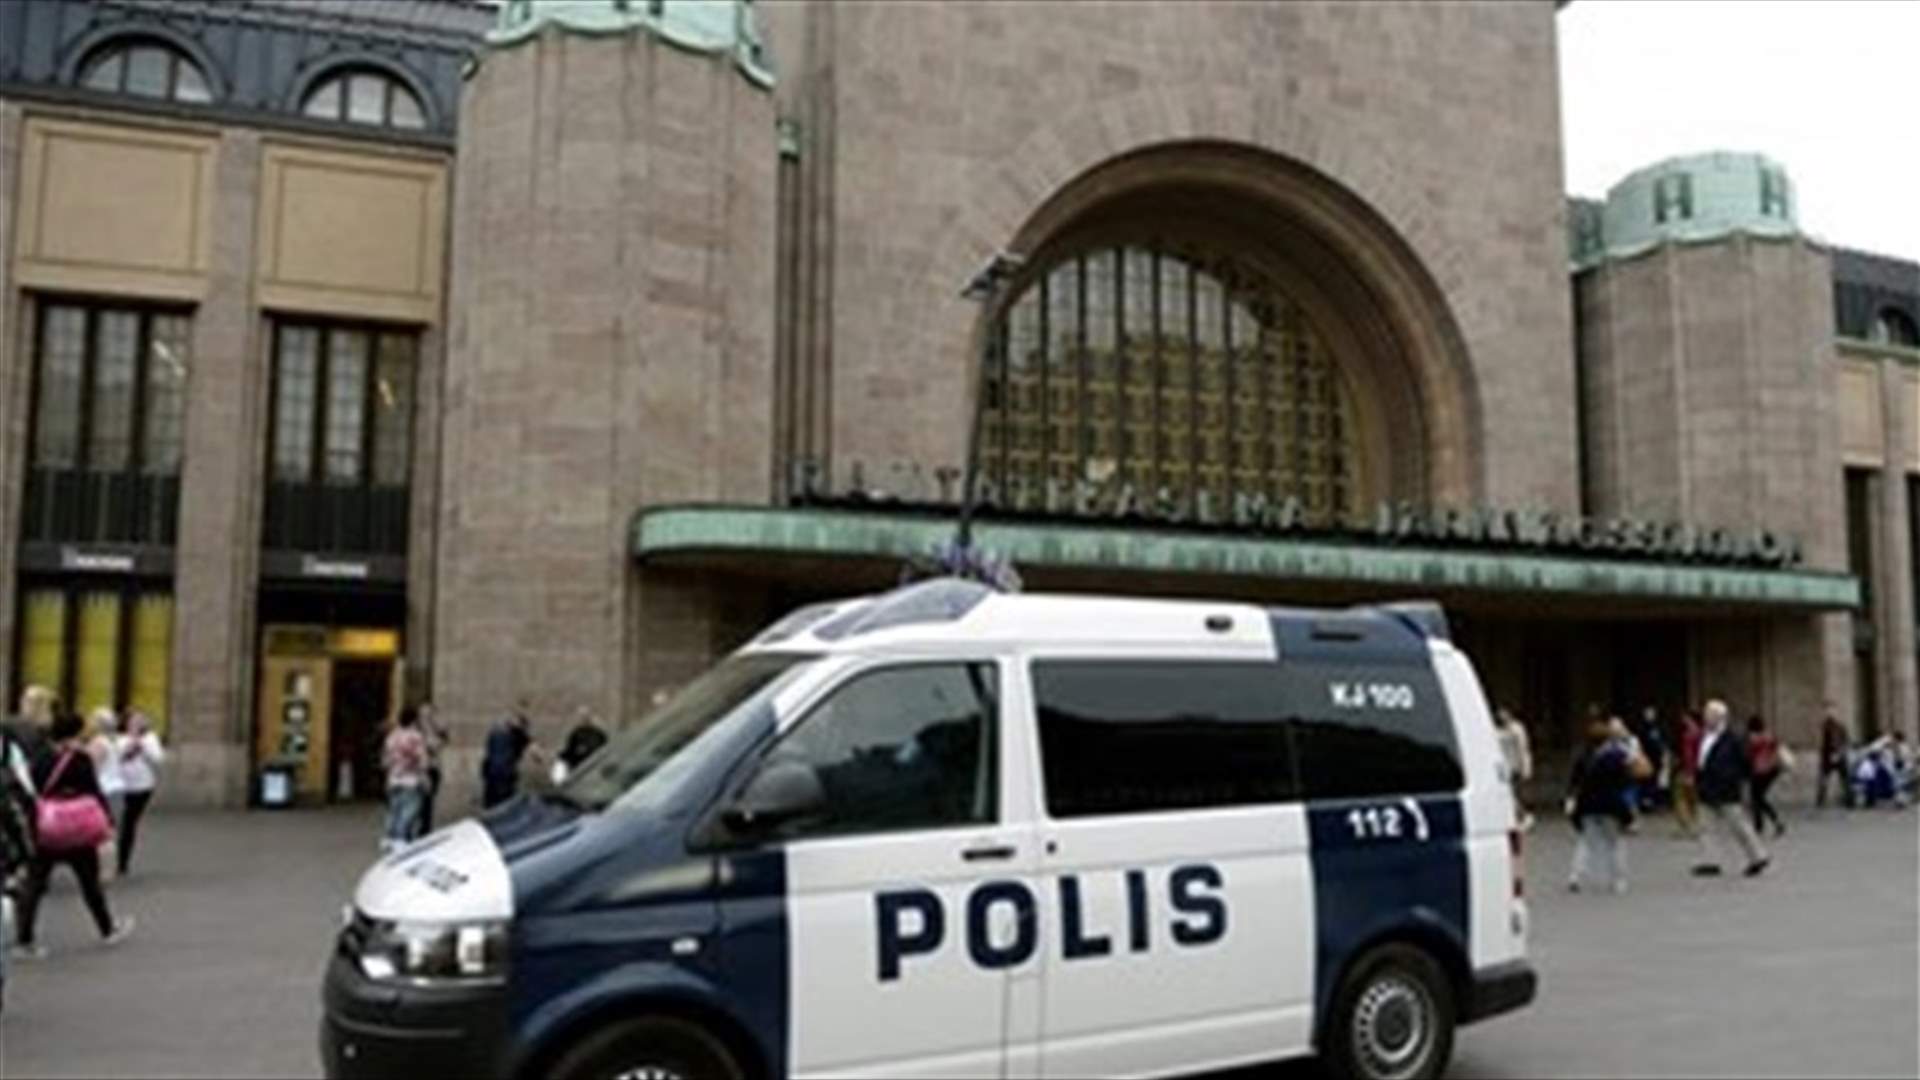 Finnish stabbings treated as terror, suspect &quot;targeted women&quot; -police